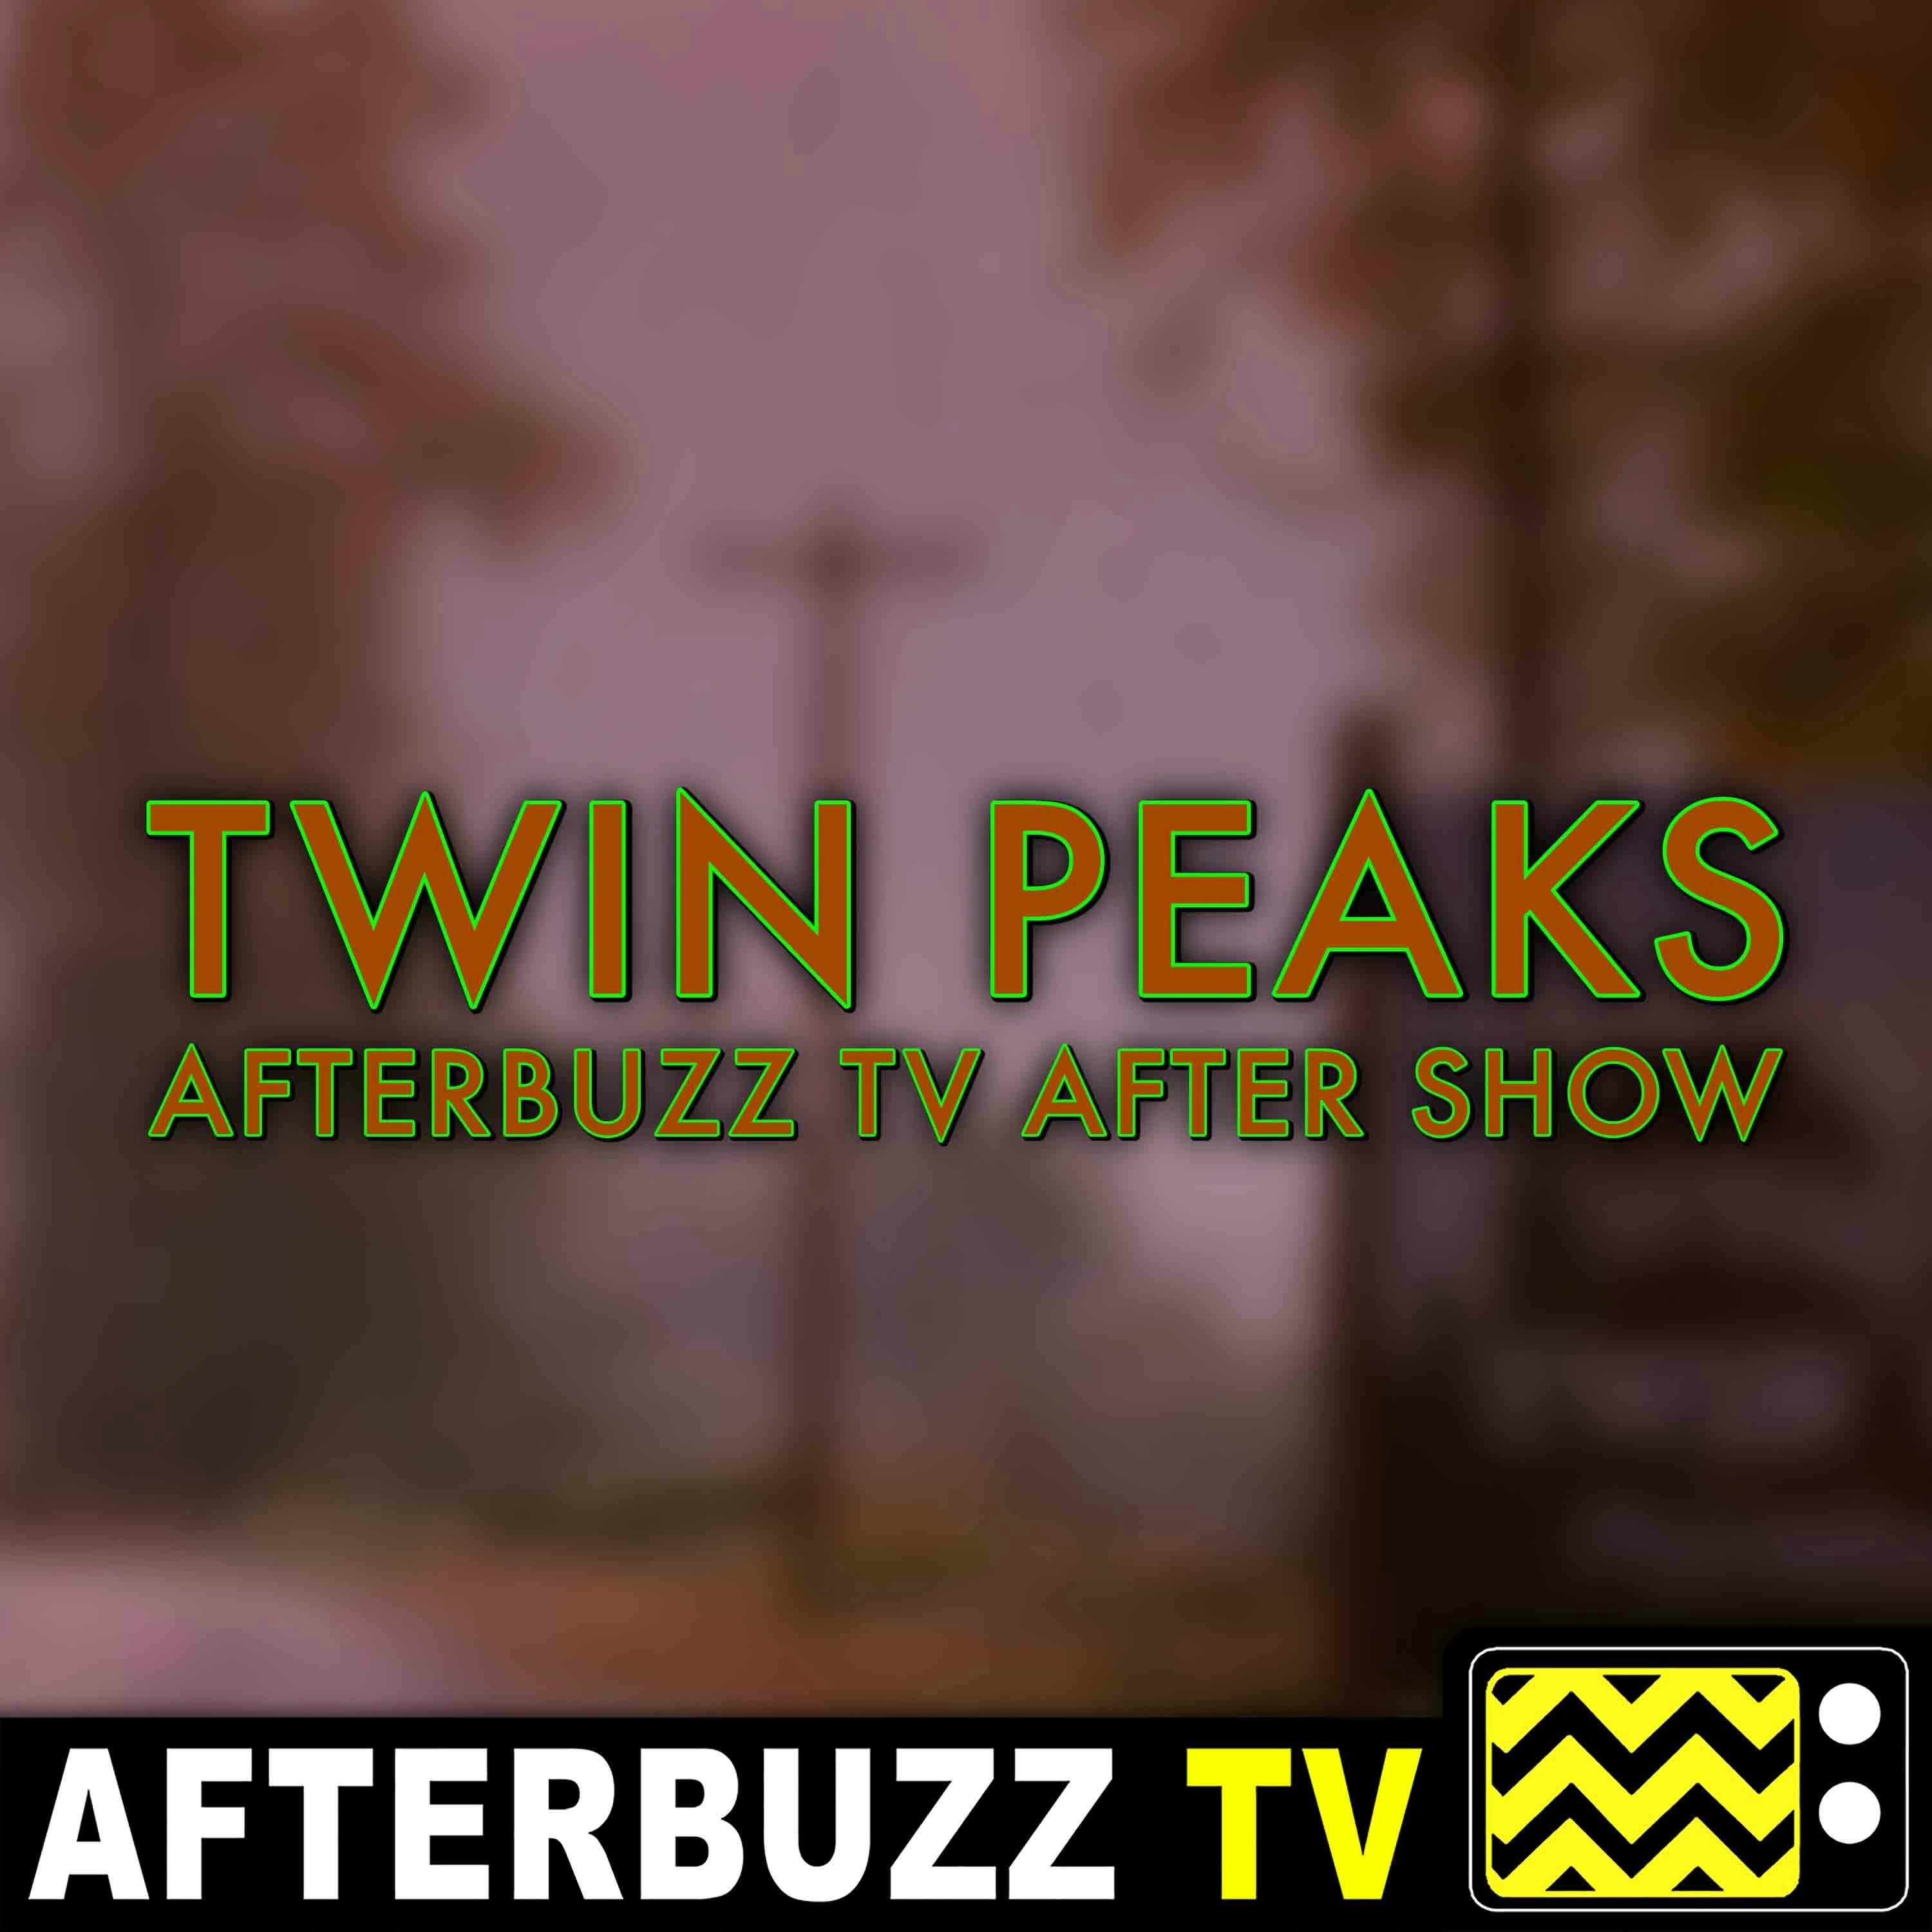 Twin Peaks S:1 | The Return: Part 12 E:12 | AfterBuzz TV AfterShow